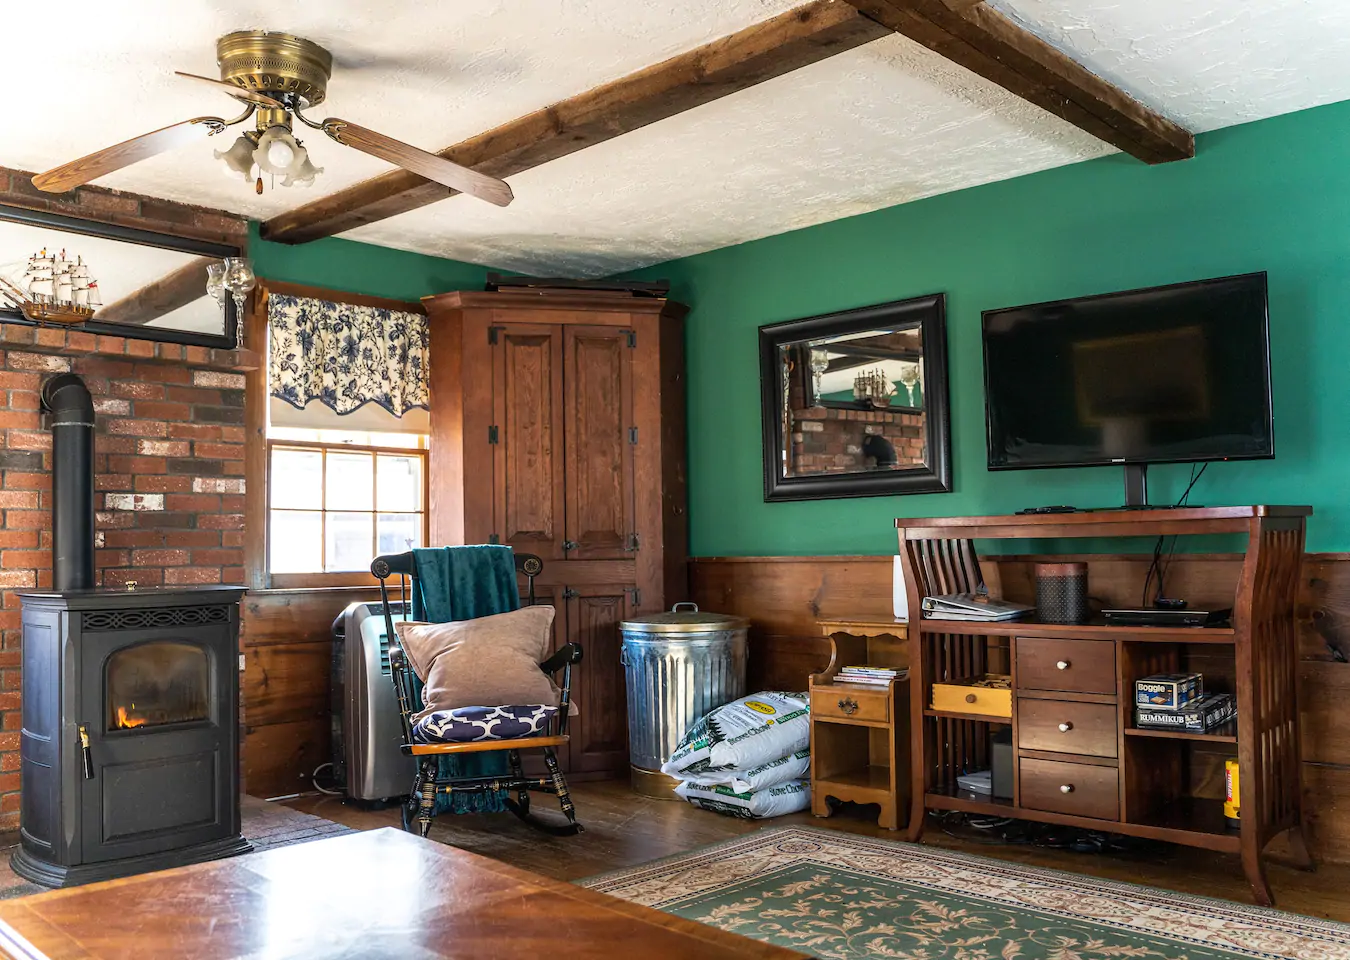 Family room with green walls and traditional furniture